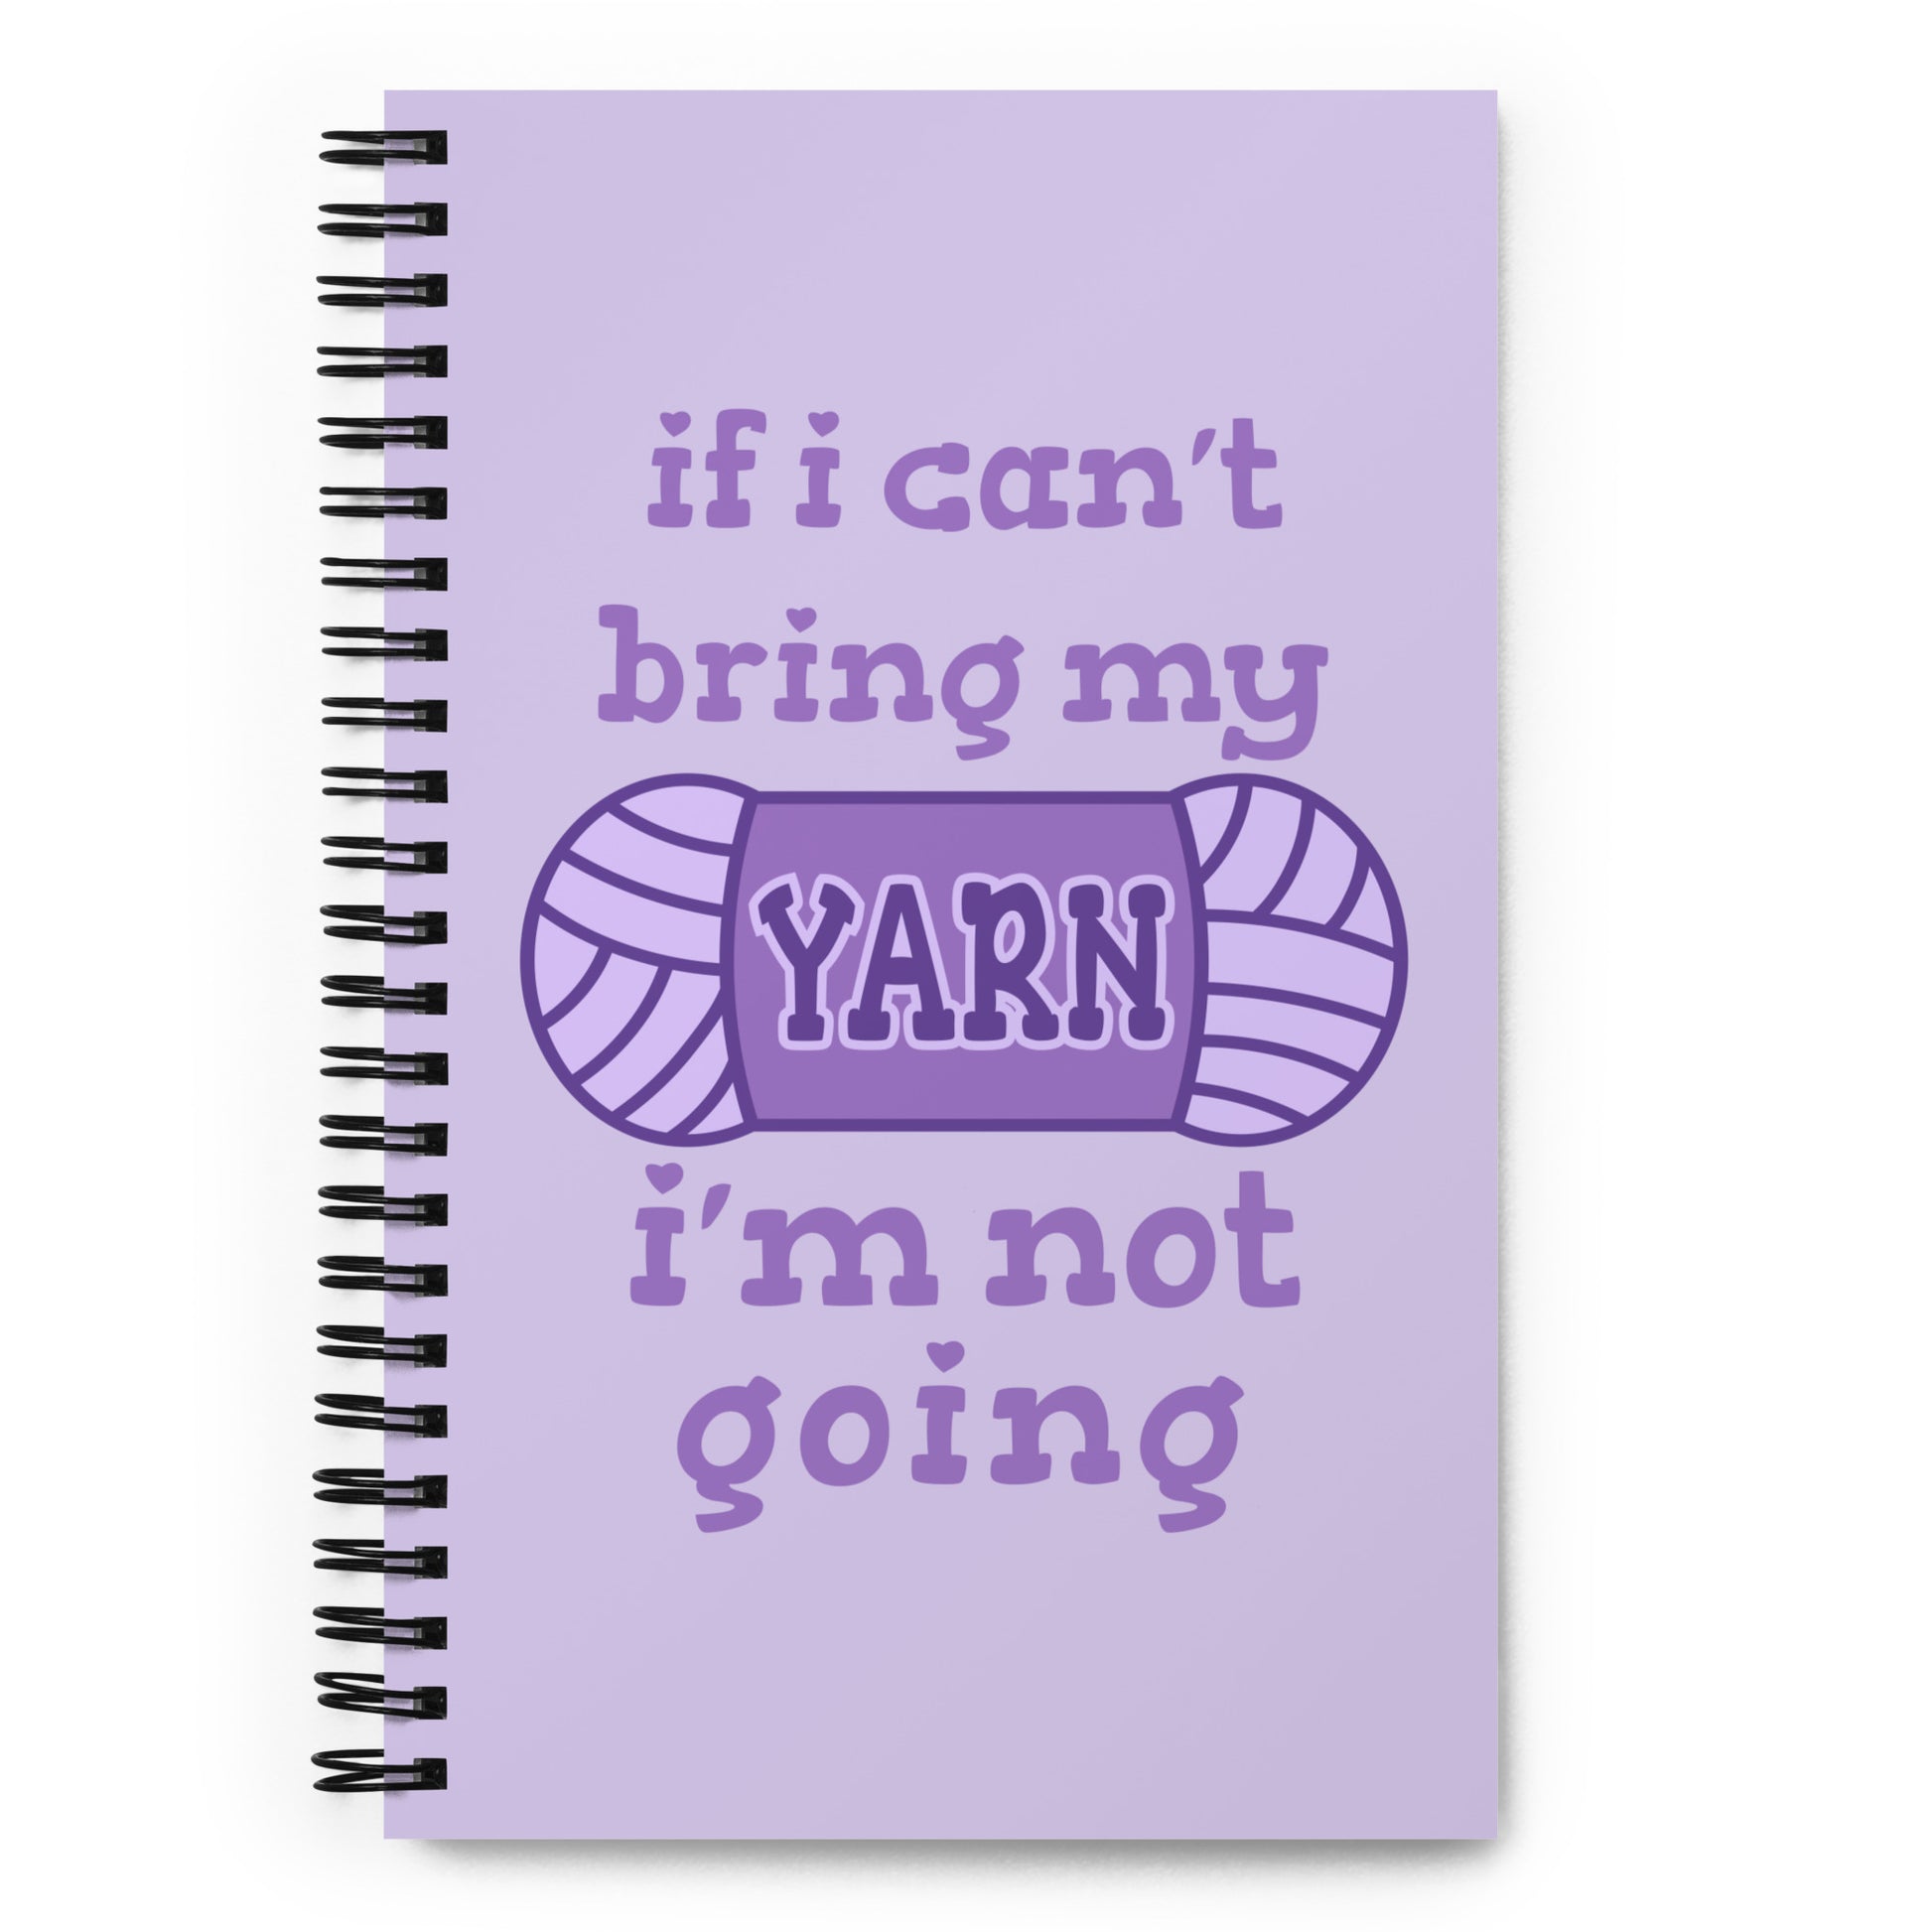 A light purple wire-bound notebook with text reading "If I can't bring my yarn, I'm not going". The word "yarn" is centered on an illustration of a skein of yarn.